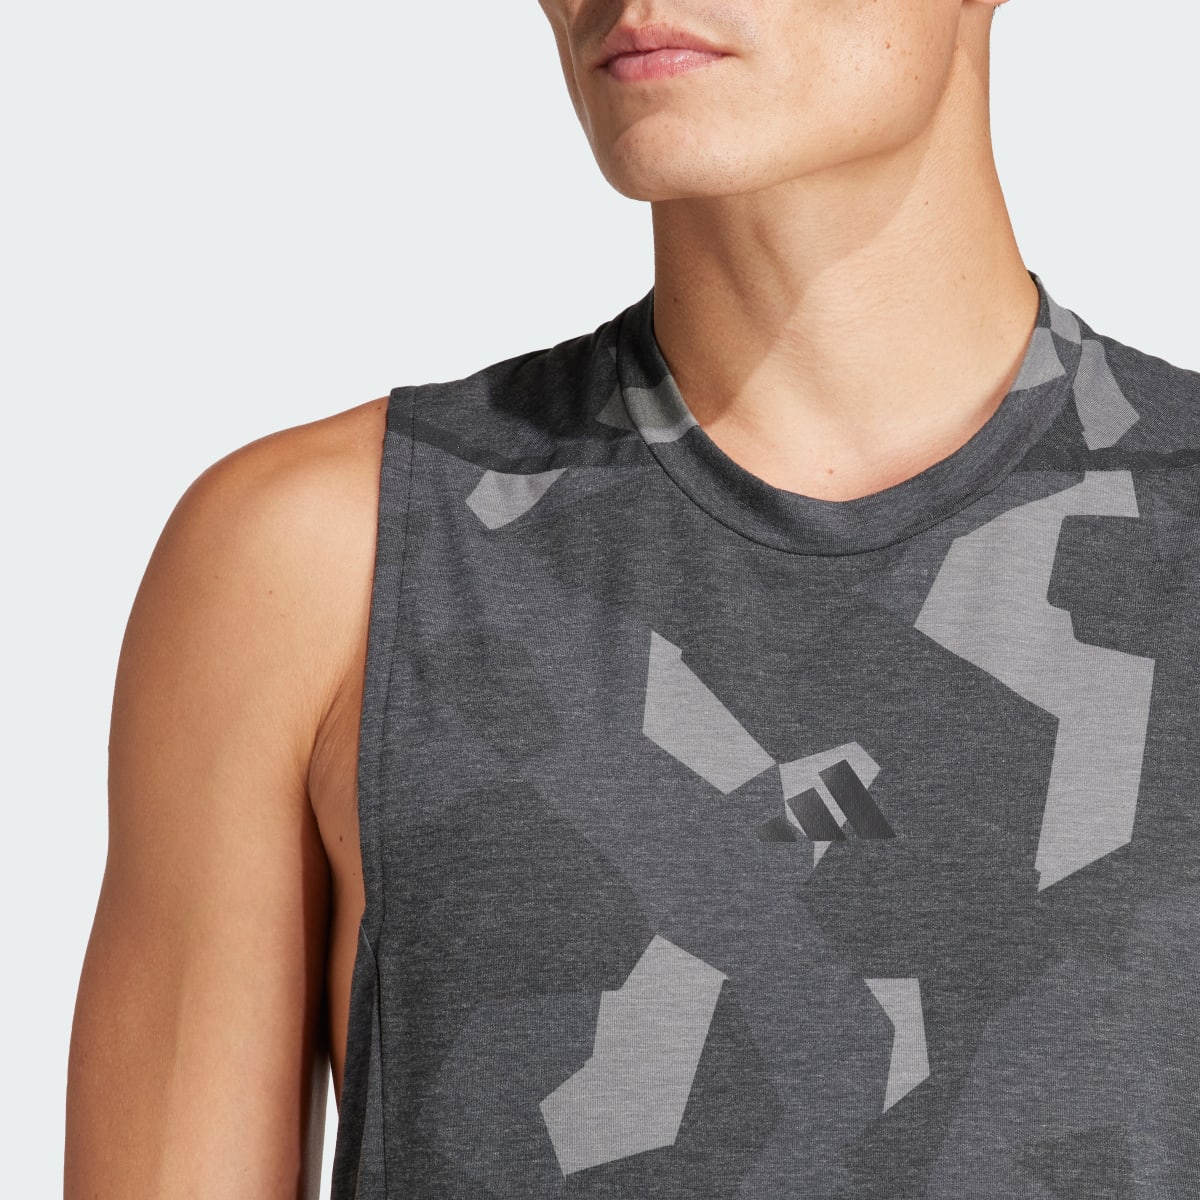 Adidas Designed for Training Pro Series Workout Tank Top. 5